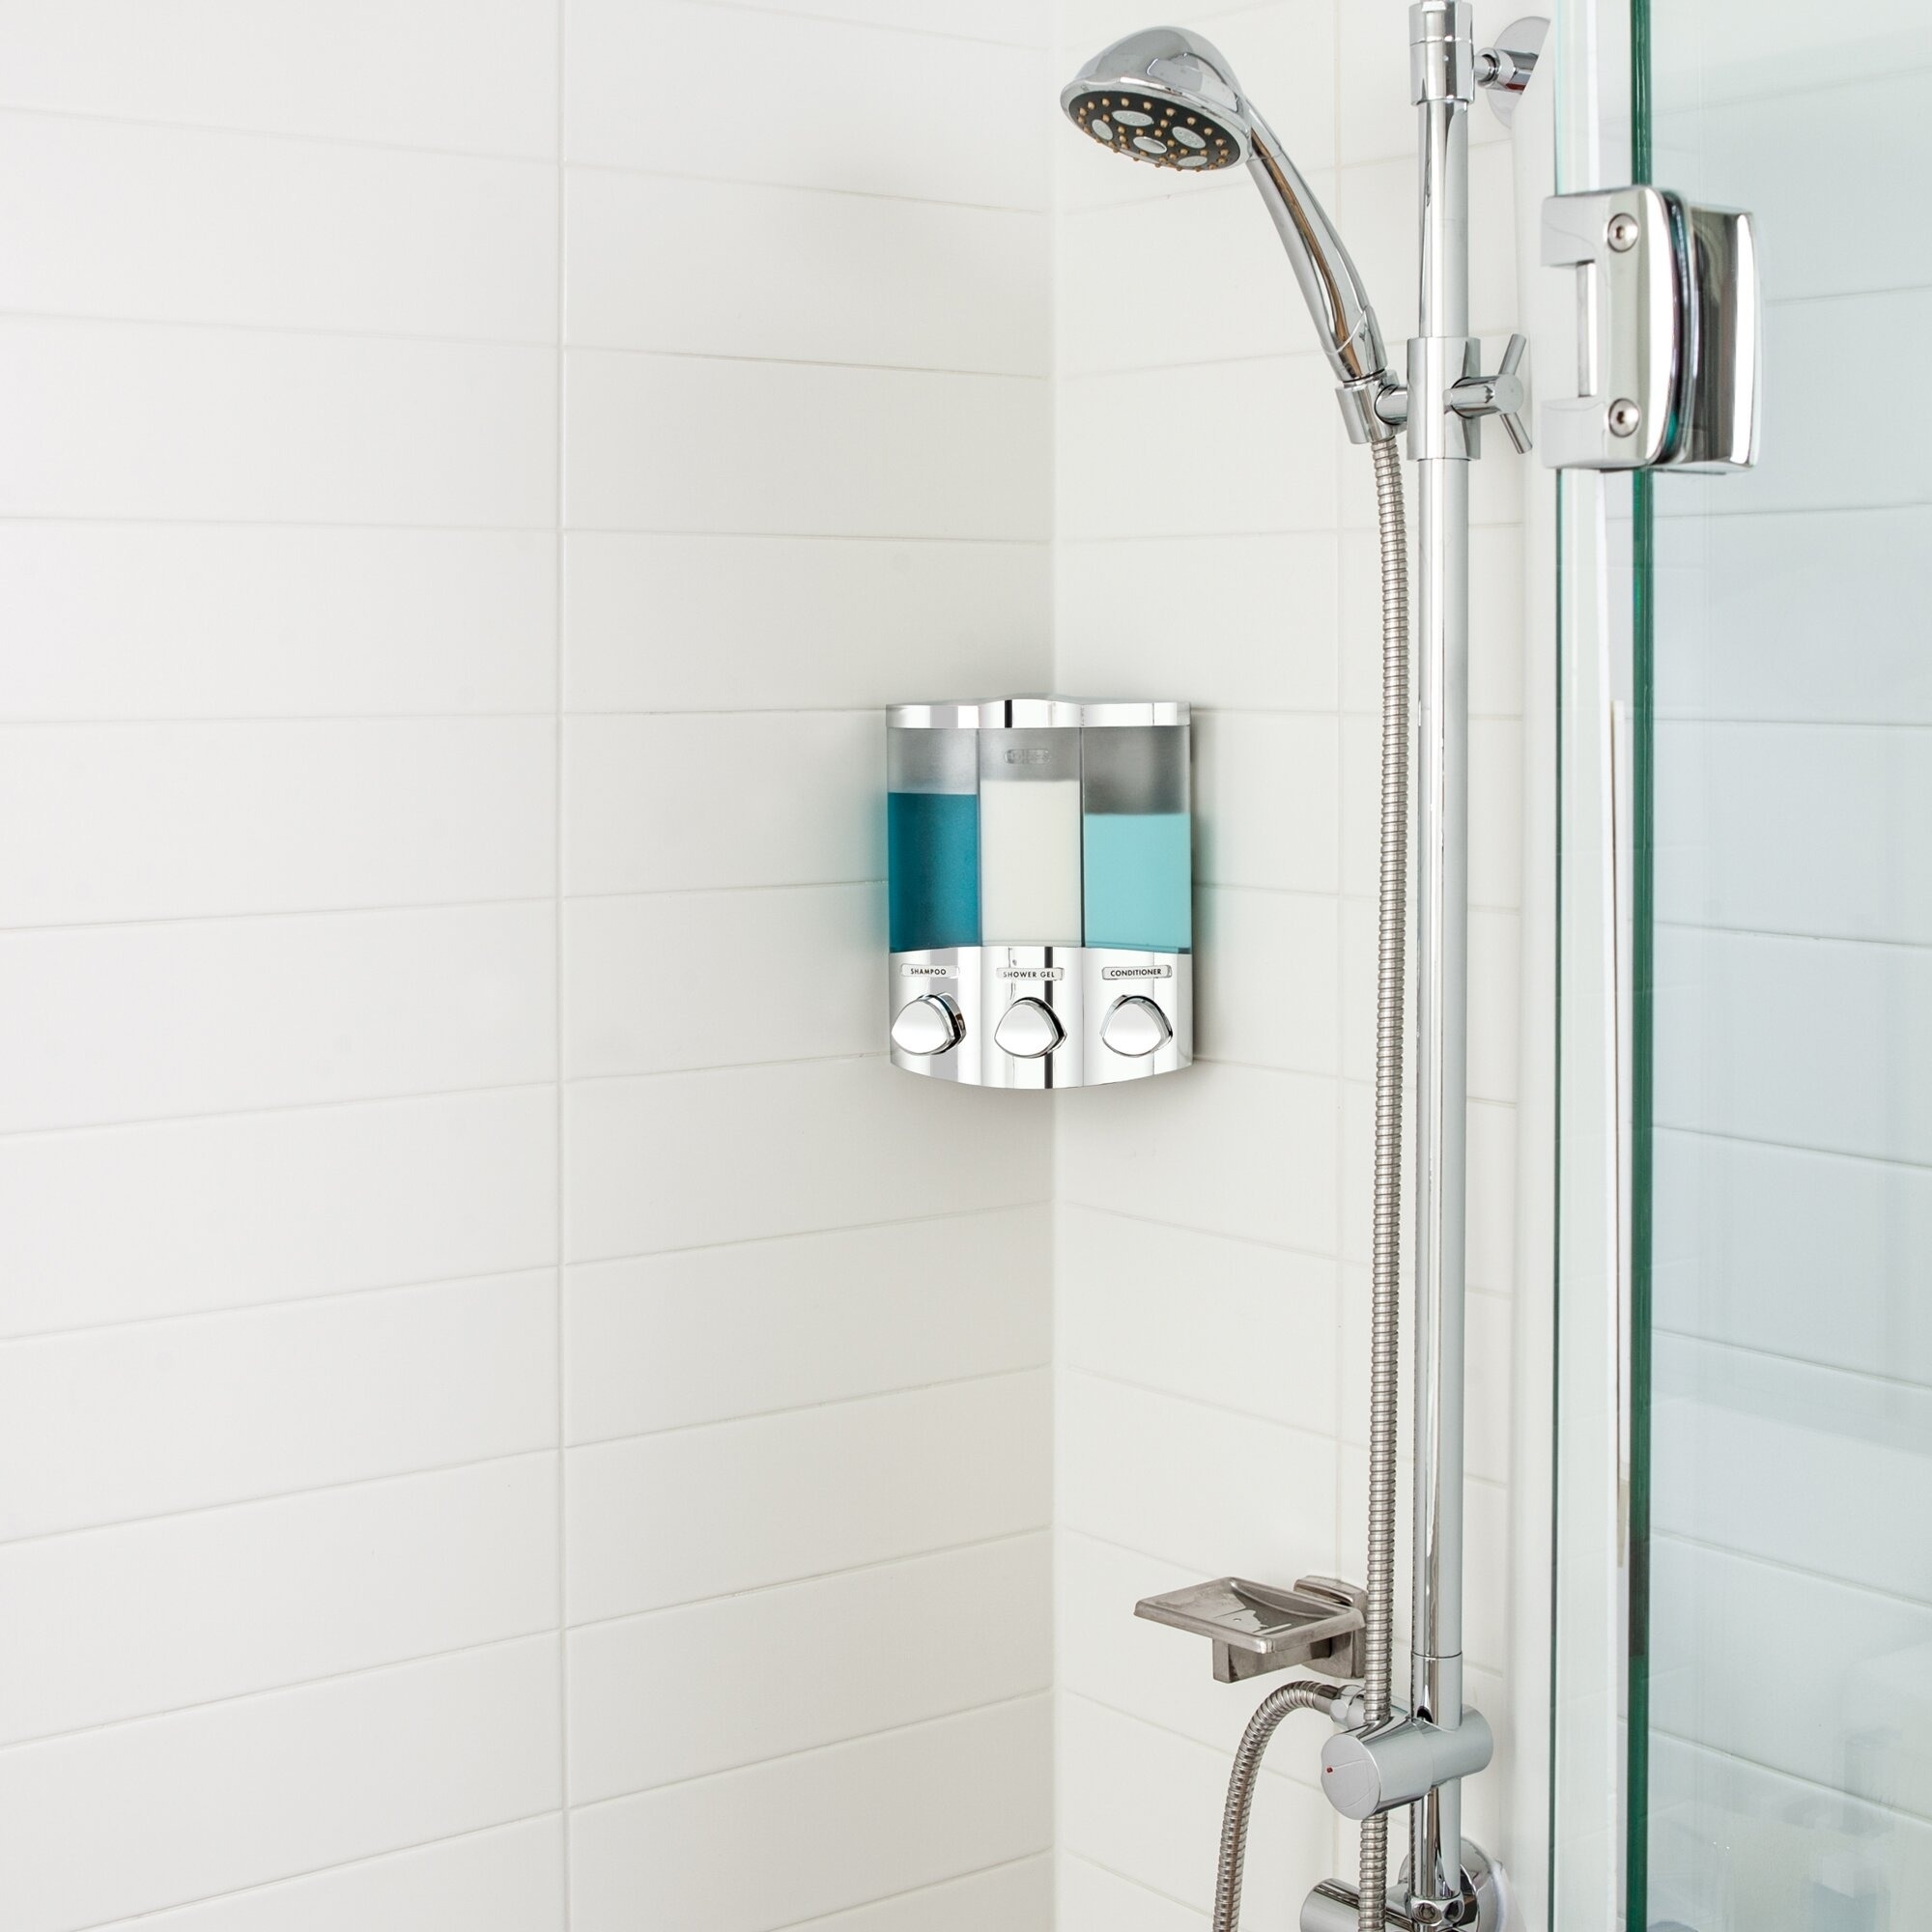 the mounted soap dispenser with three compartments on the wall of a shower